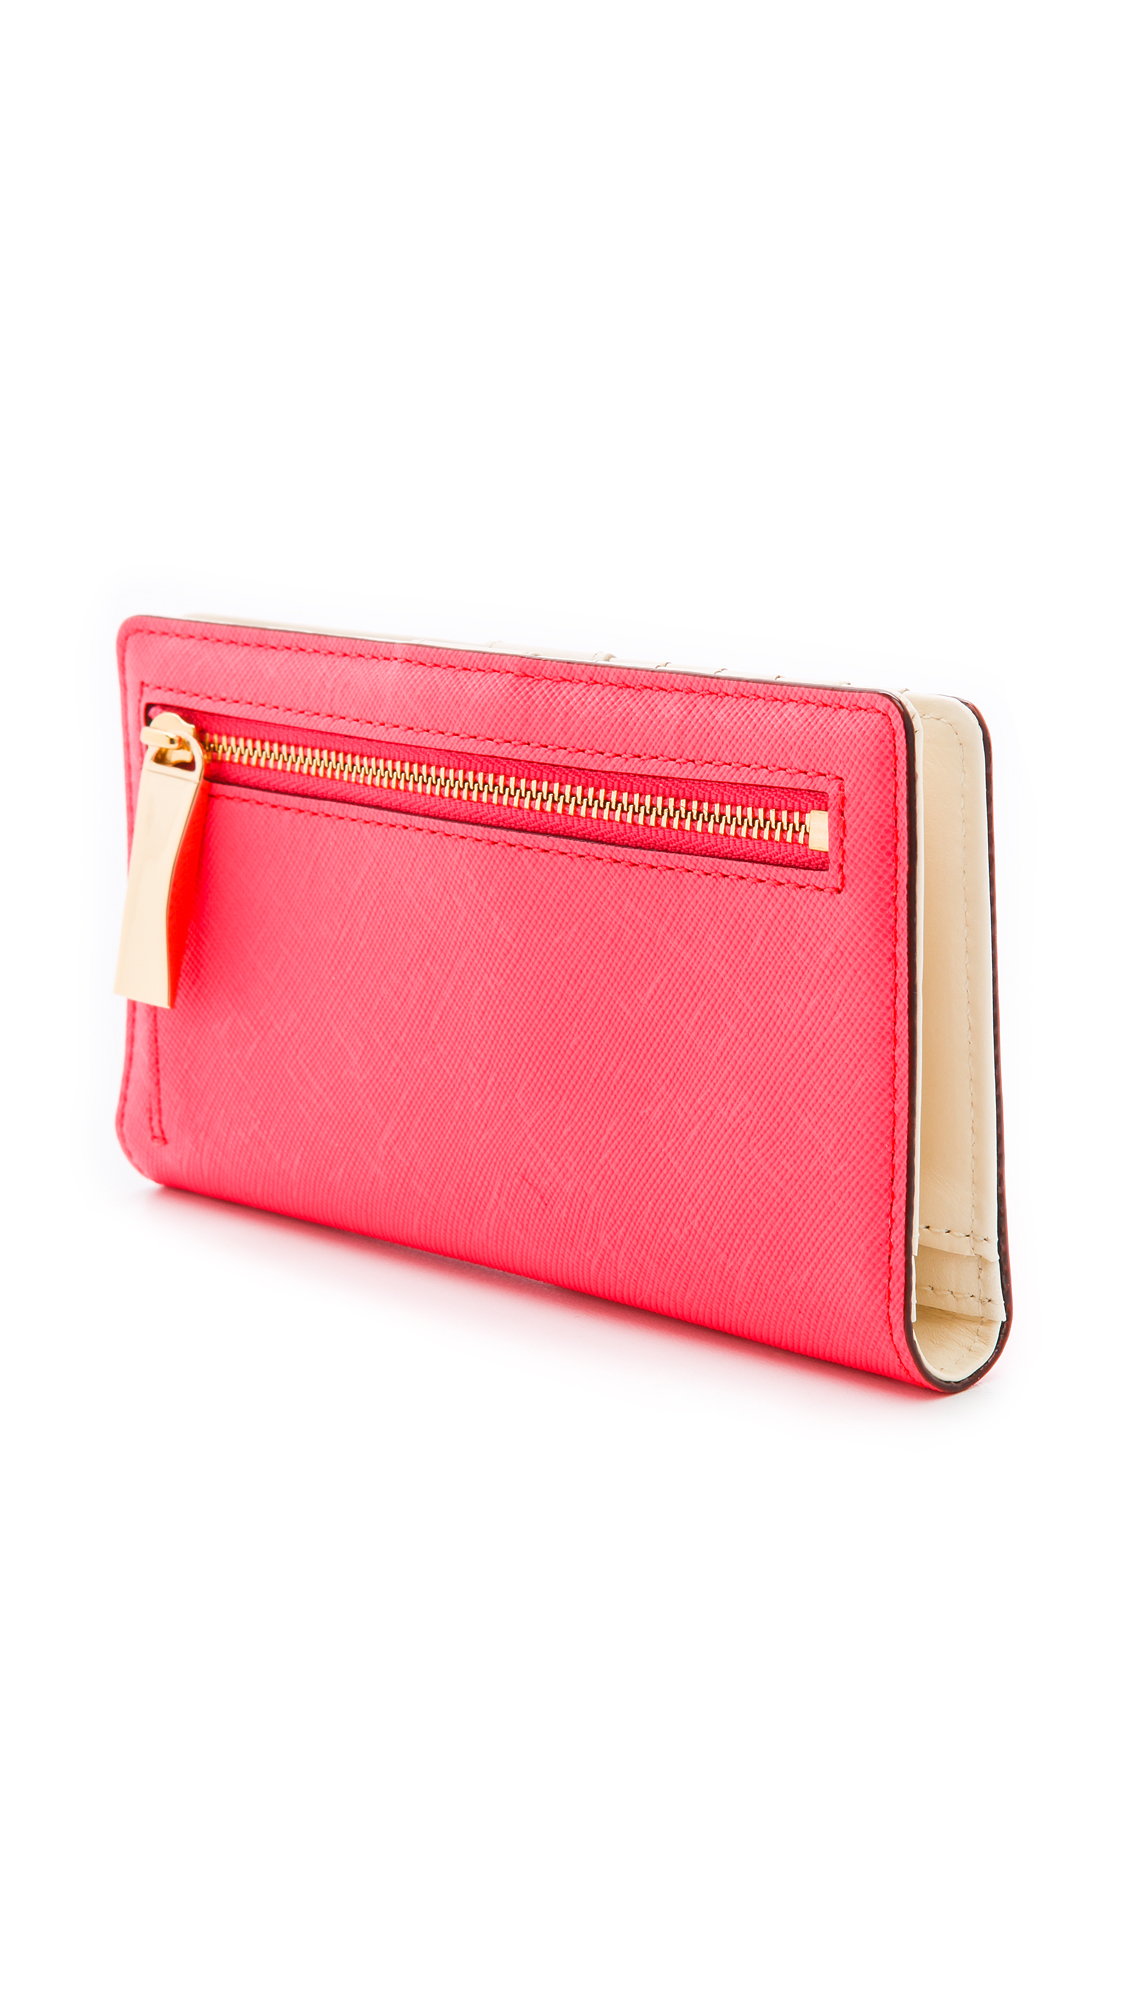 Kate Spade Cherry Lane Stacy Wallet Gold in Red - Lyst